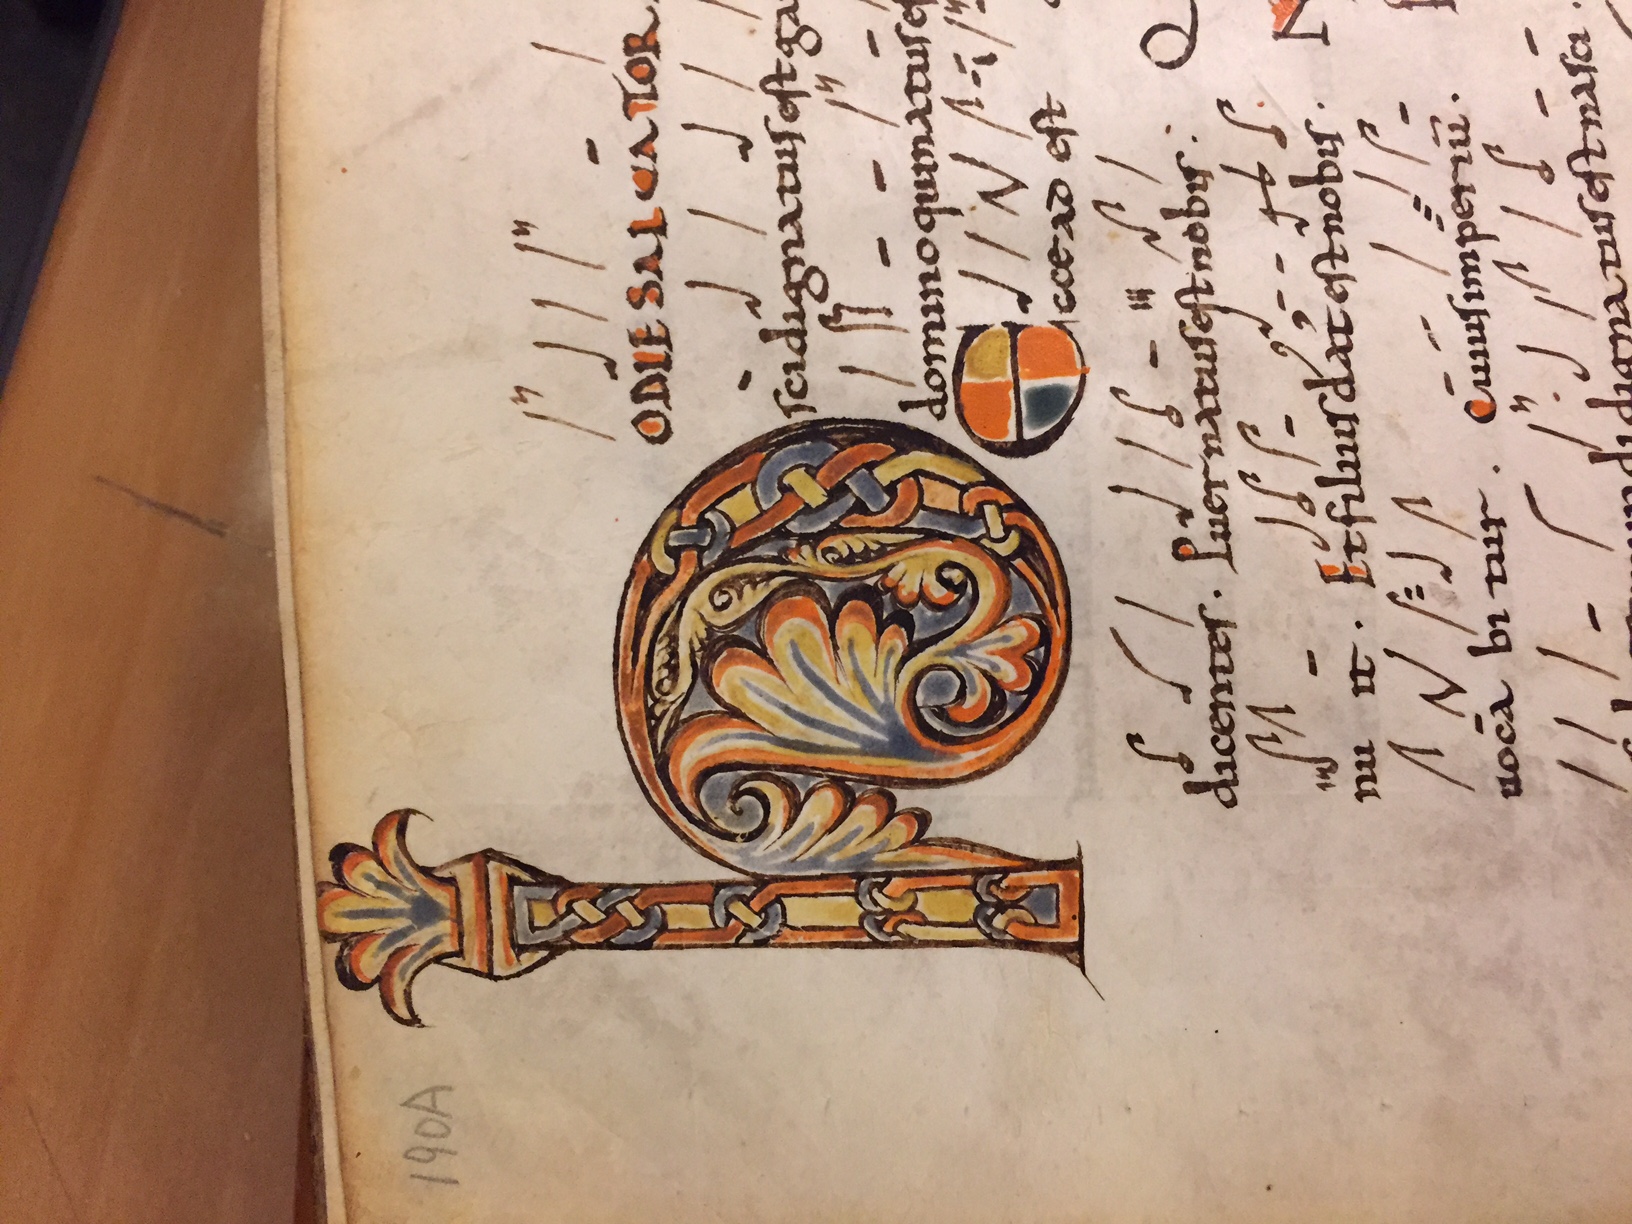 Calligraphic writing and drawing from an old book. A stylized pillar is also drawn on the page near the text.